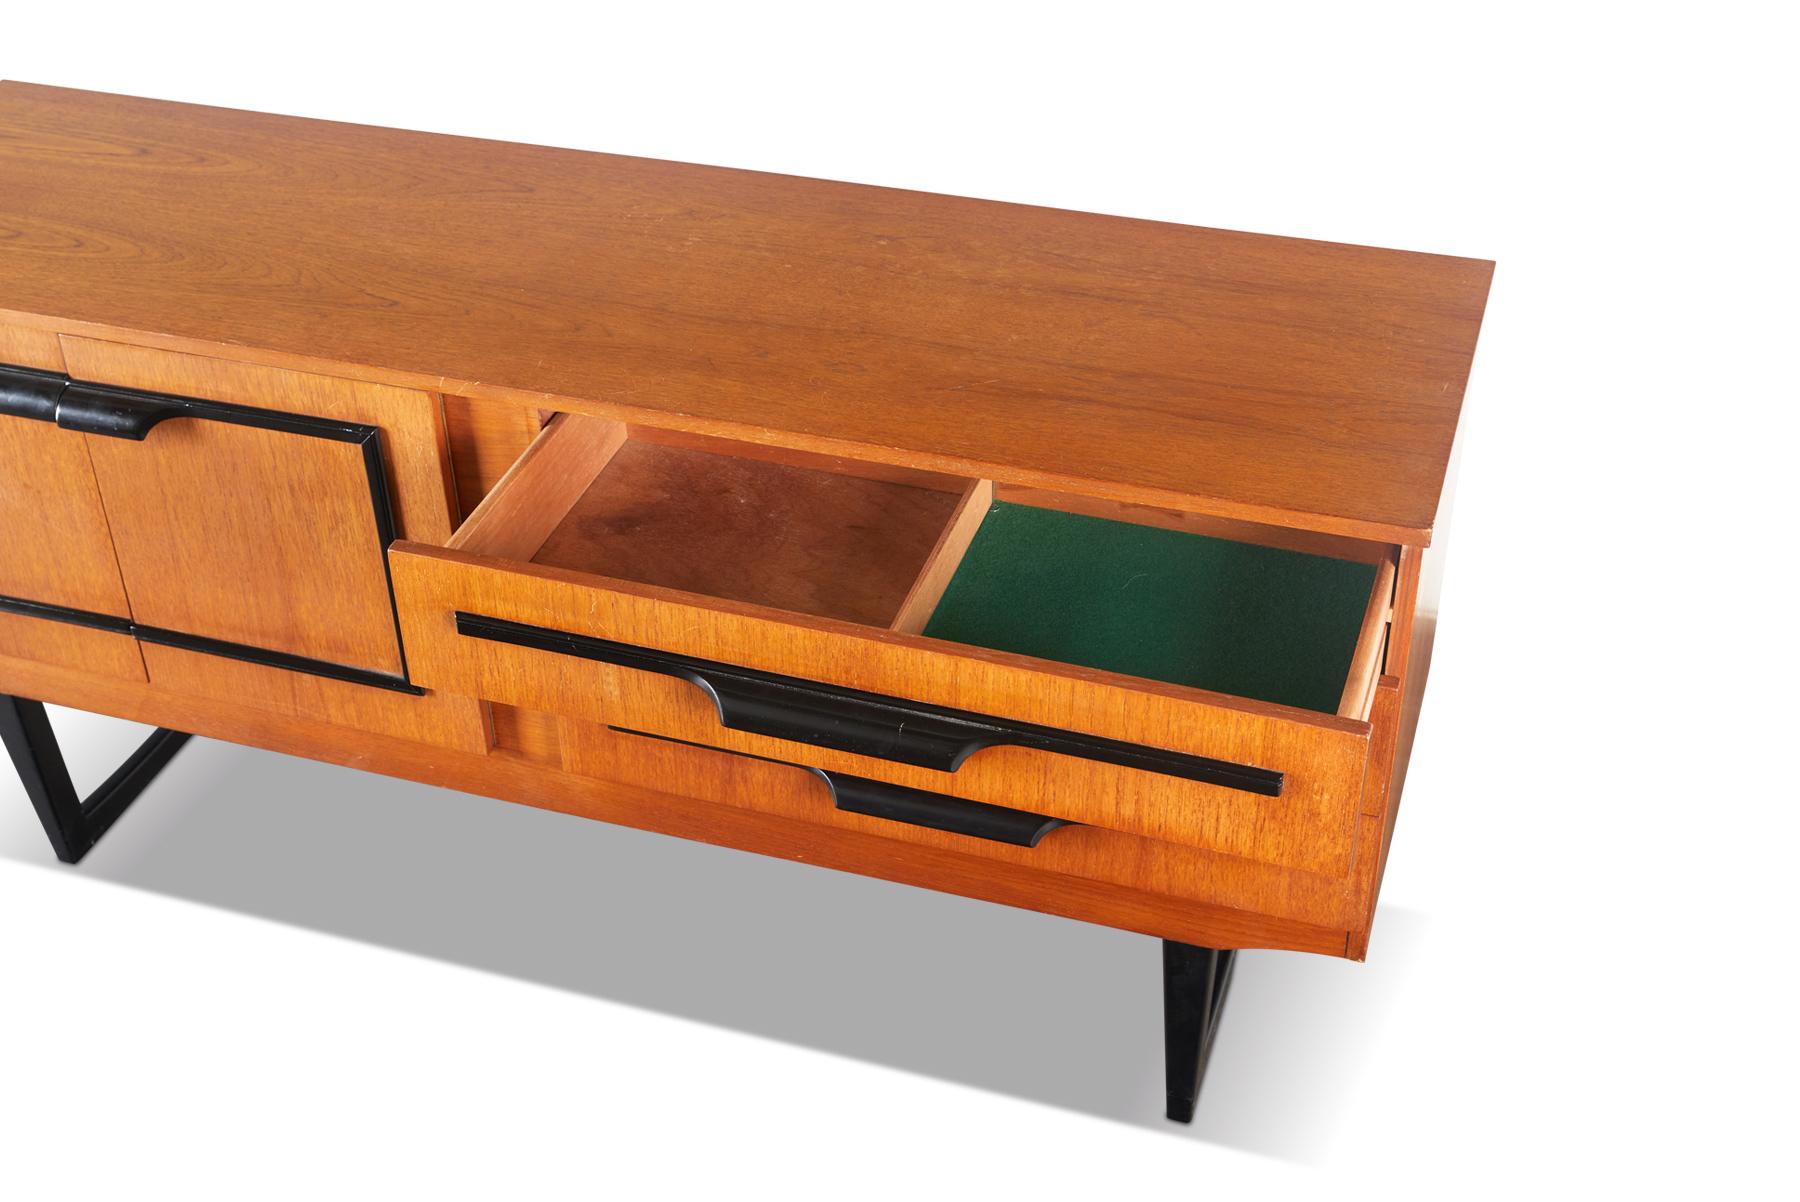 English Modern Midcentury Credenza in Teak with Black Lacquer Accents 1